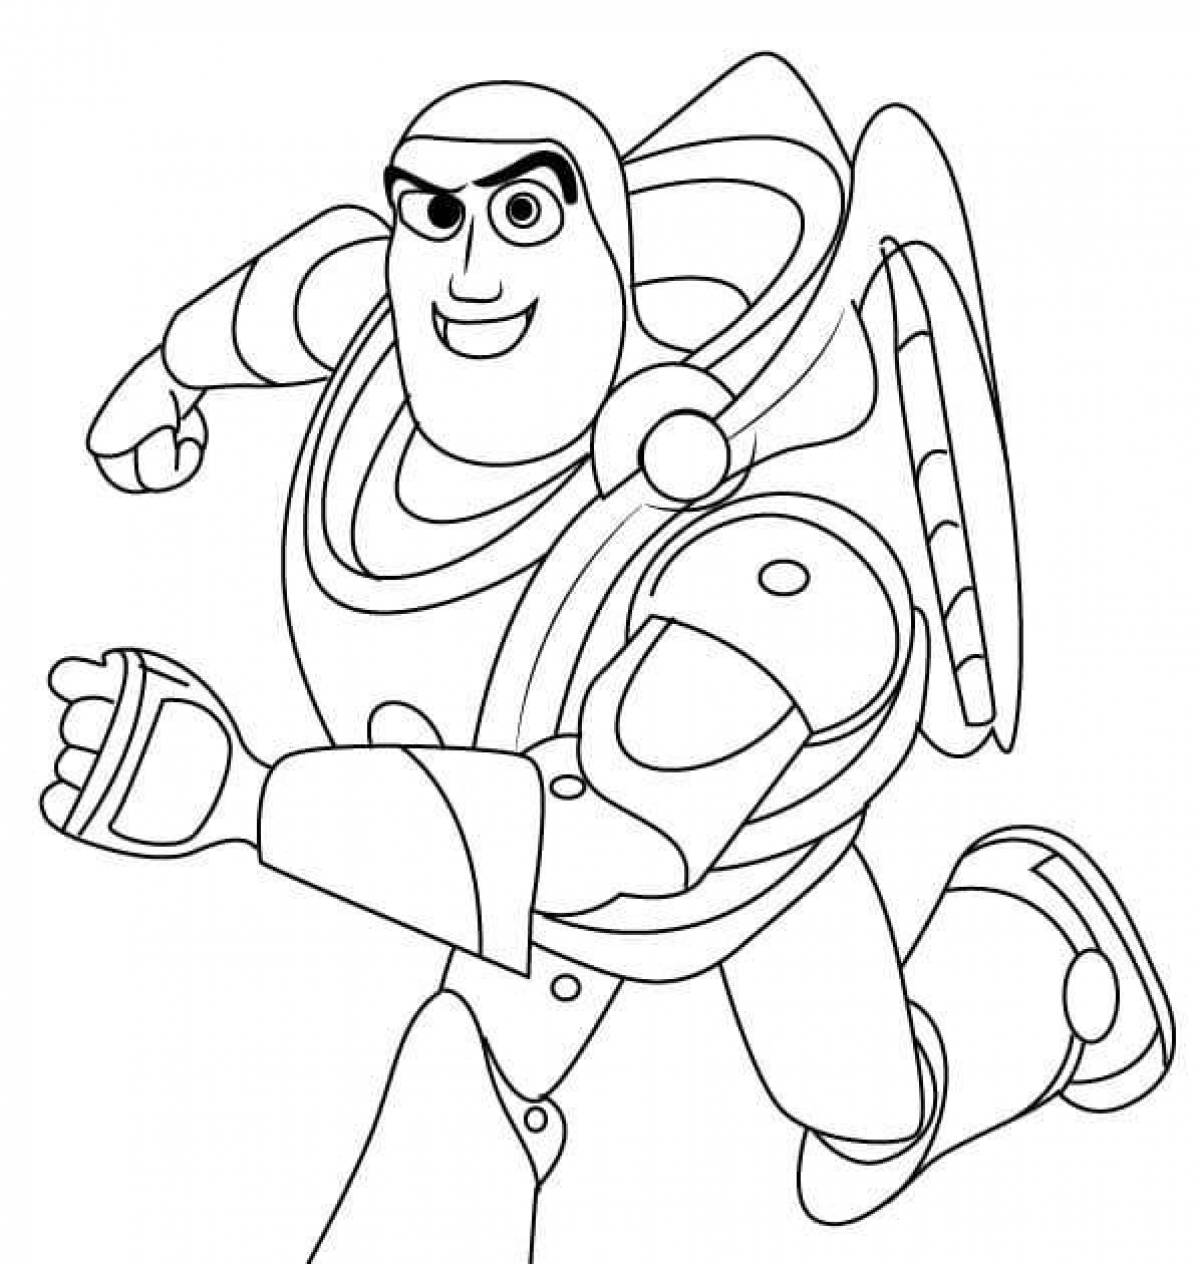 Buzz Lightyear dazzling coloring book